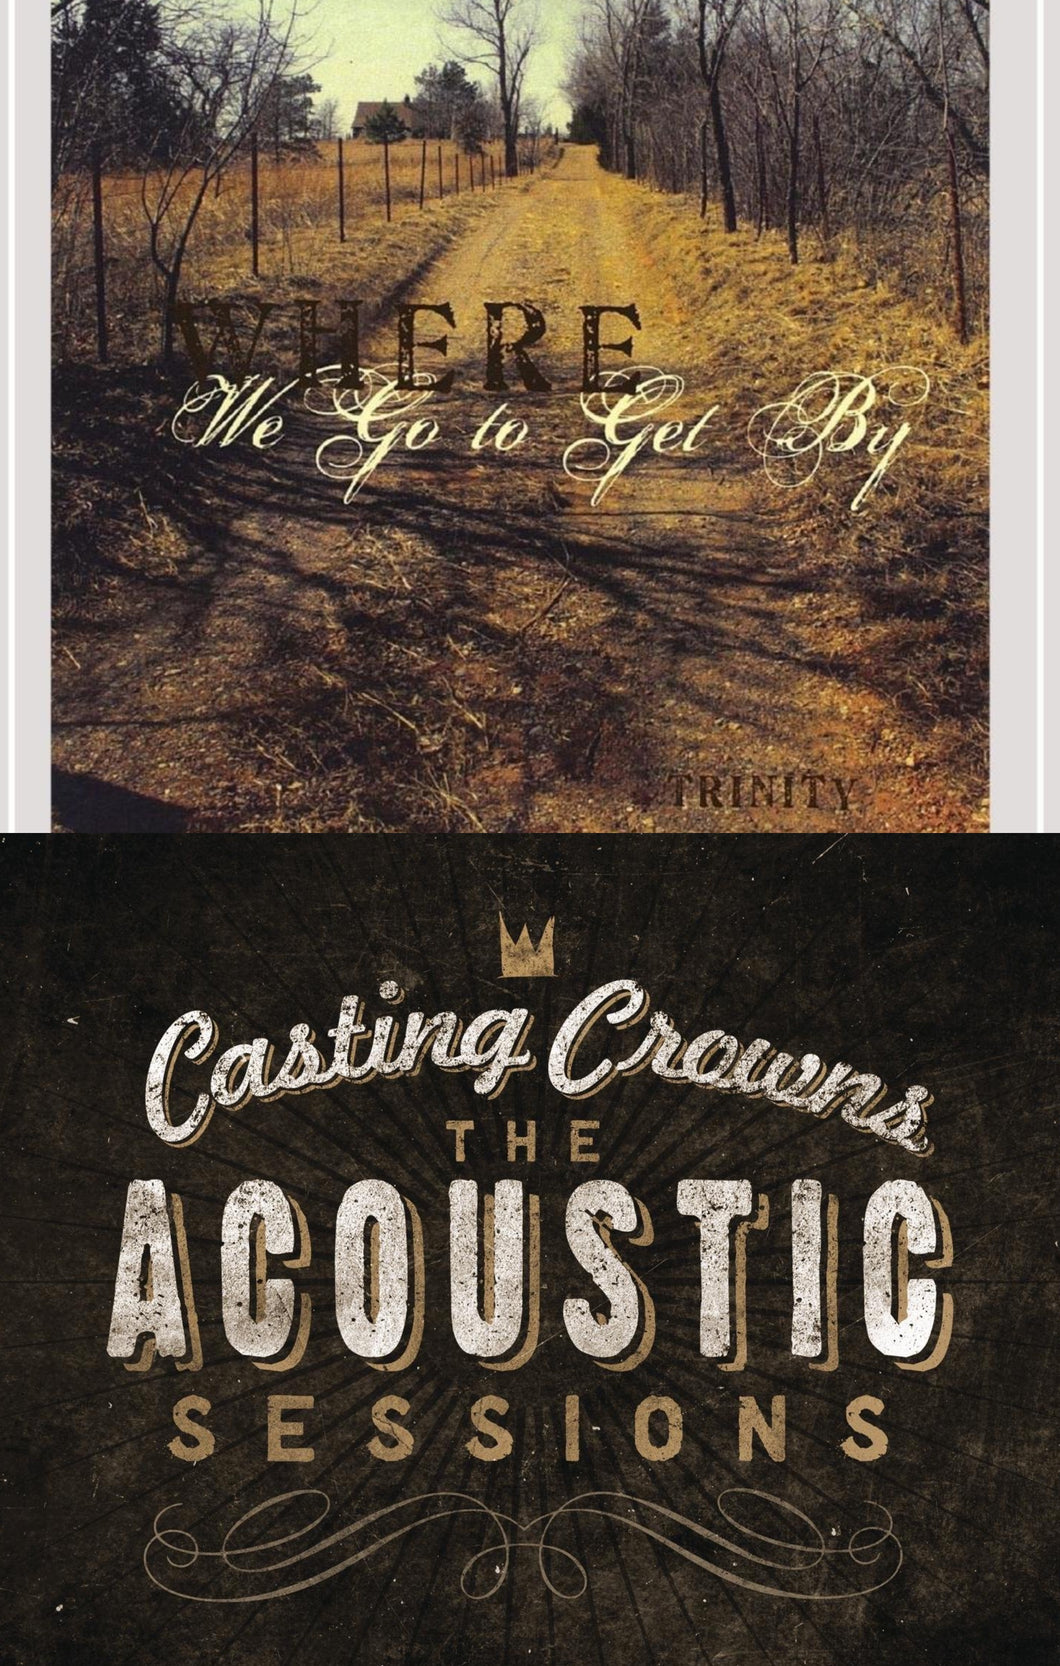 Trinity Where We Go to Get By + Casting Crowns Acoustic Sessions 2CD